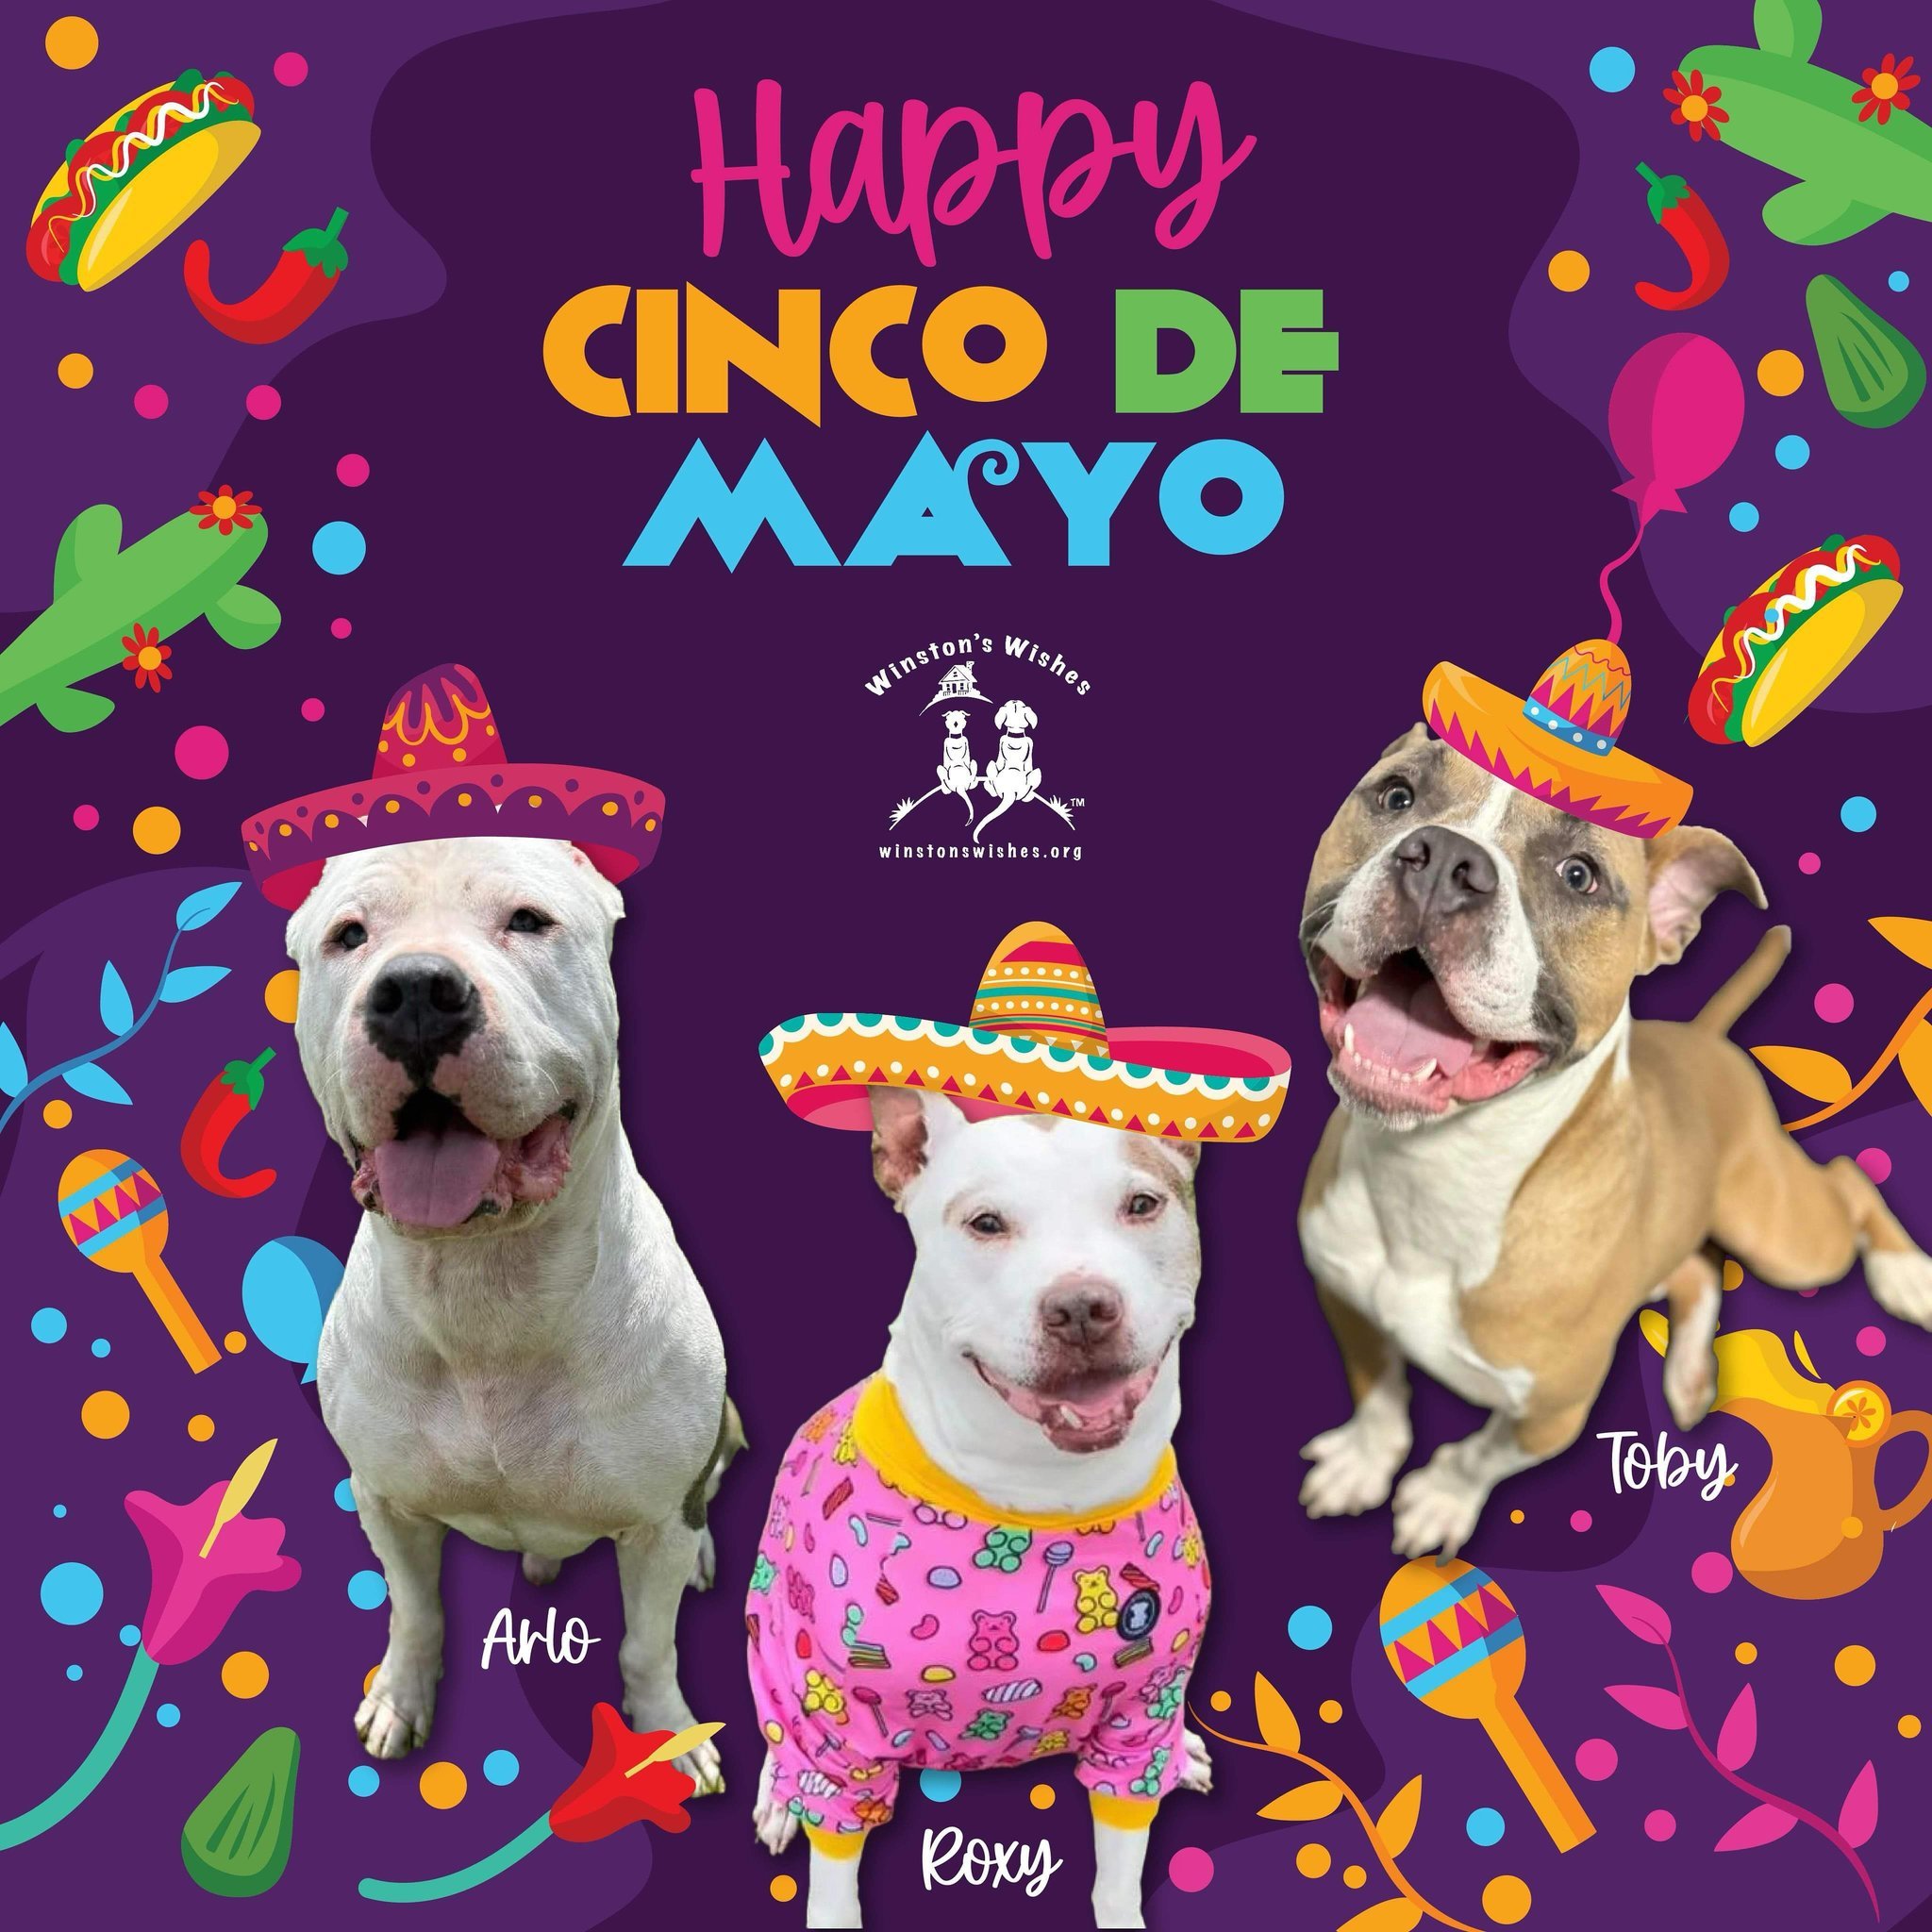 Happy Cinco de Mayo from these adorable party animals, Arlo, Roxy, &amp; Toby! 😍🎉 

Learn more about our adoptables by clicking the &ldquo;Adoptables&rdquo; link in our bio! 💙

#arlo #roxy #toby #adopt #adoptyournewbestfriend #adoptthecropped #cin